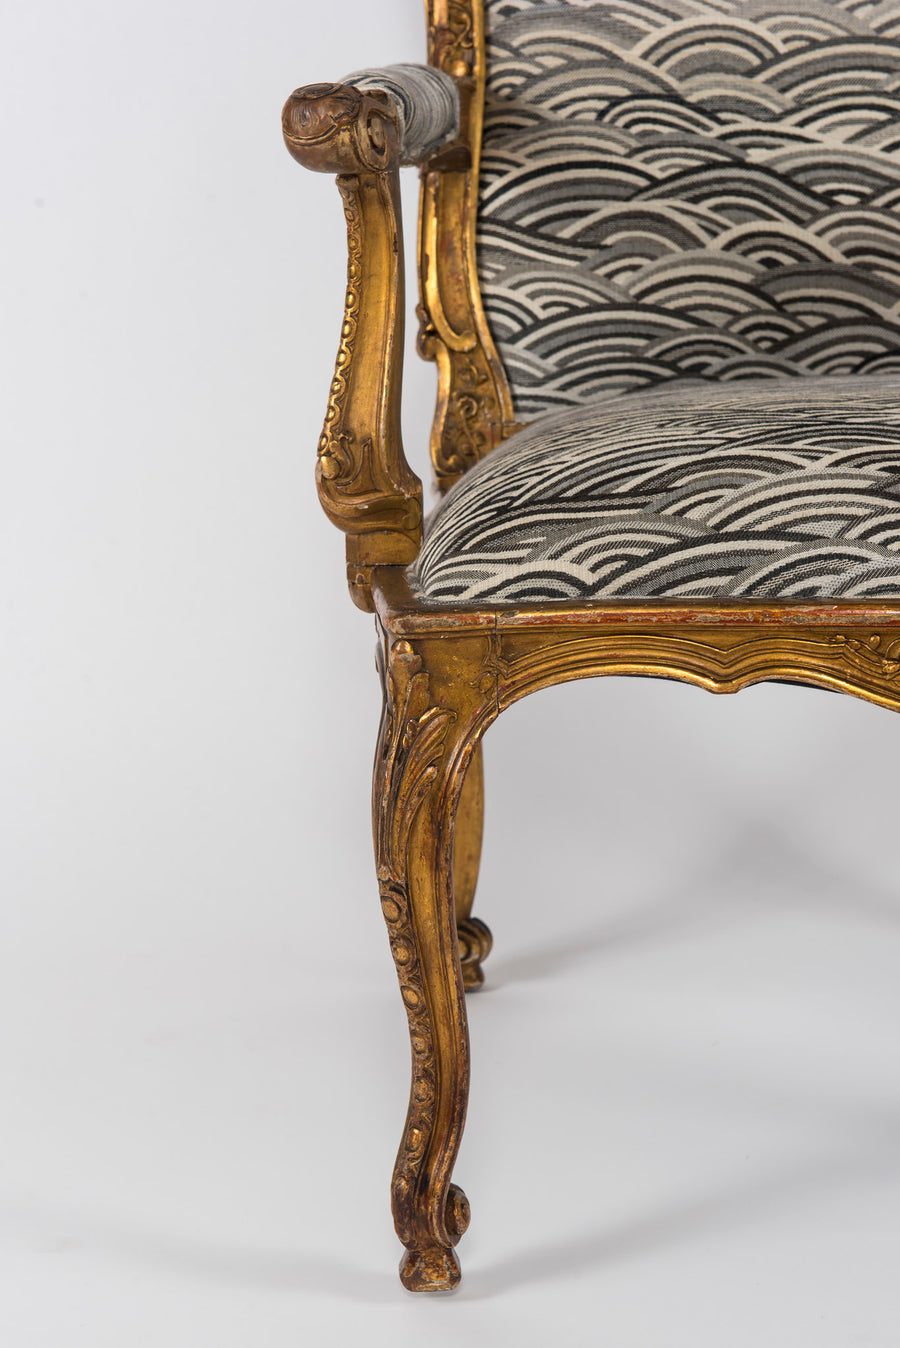 19th Century French Louis XV Style Giltwood Fauteuil